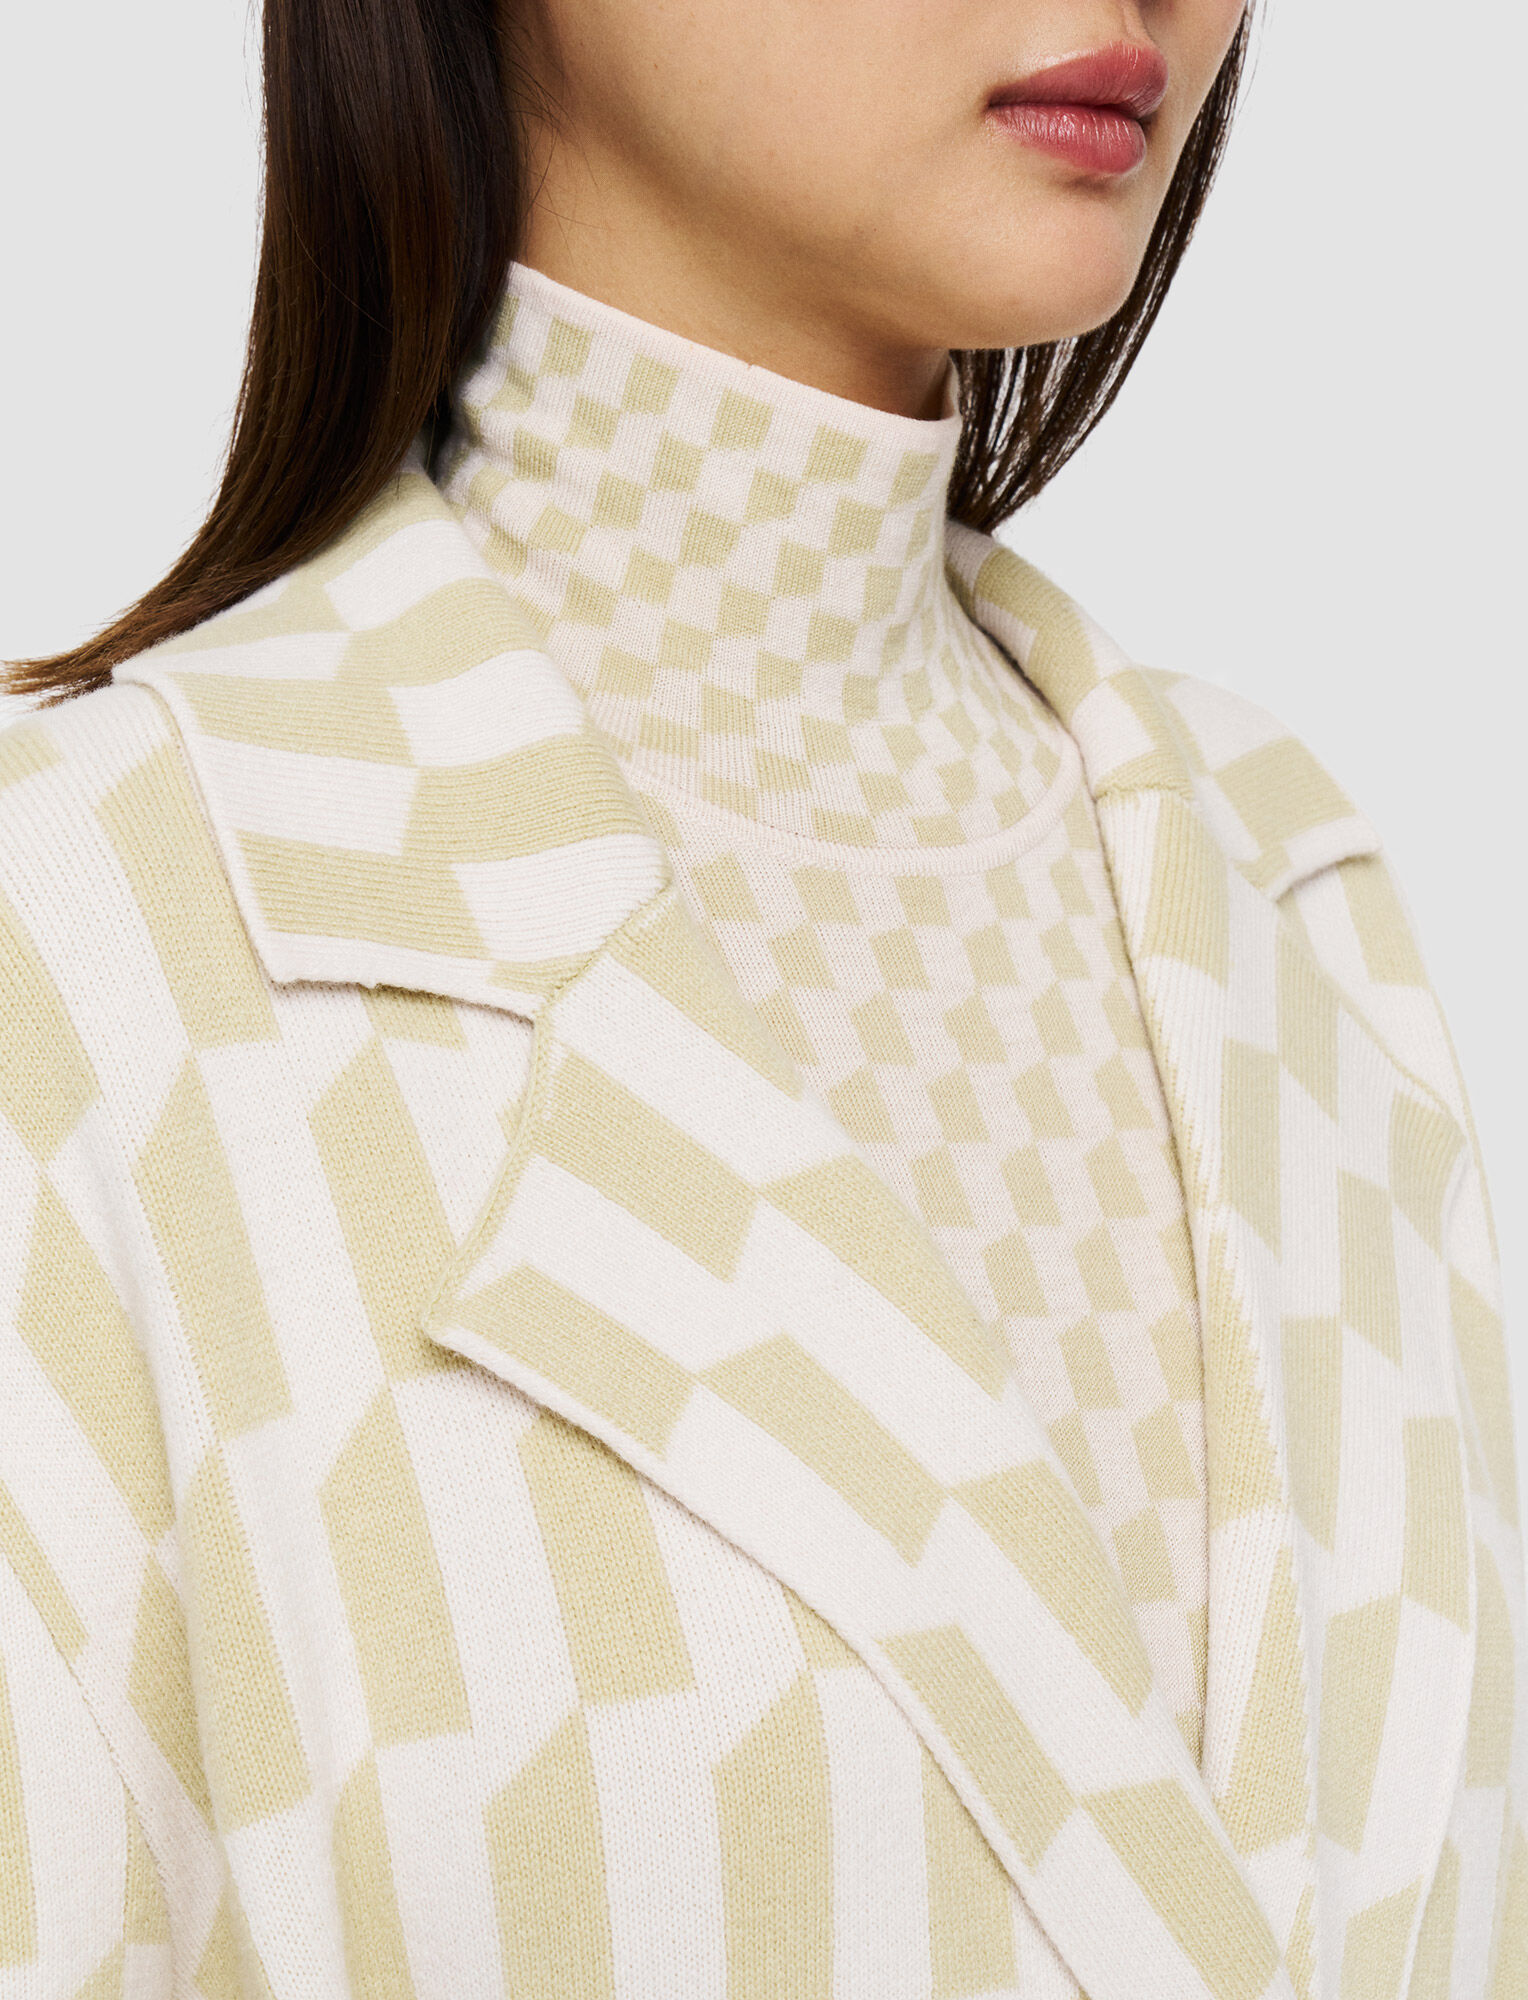 Joseph, Alcove Intarsia Knitted Coat, in Pale Olive/Ivory